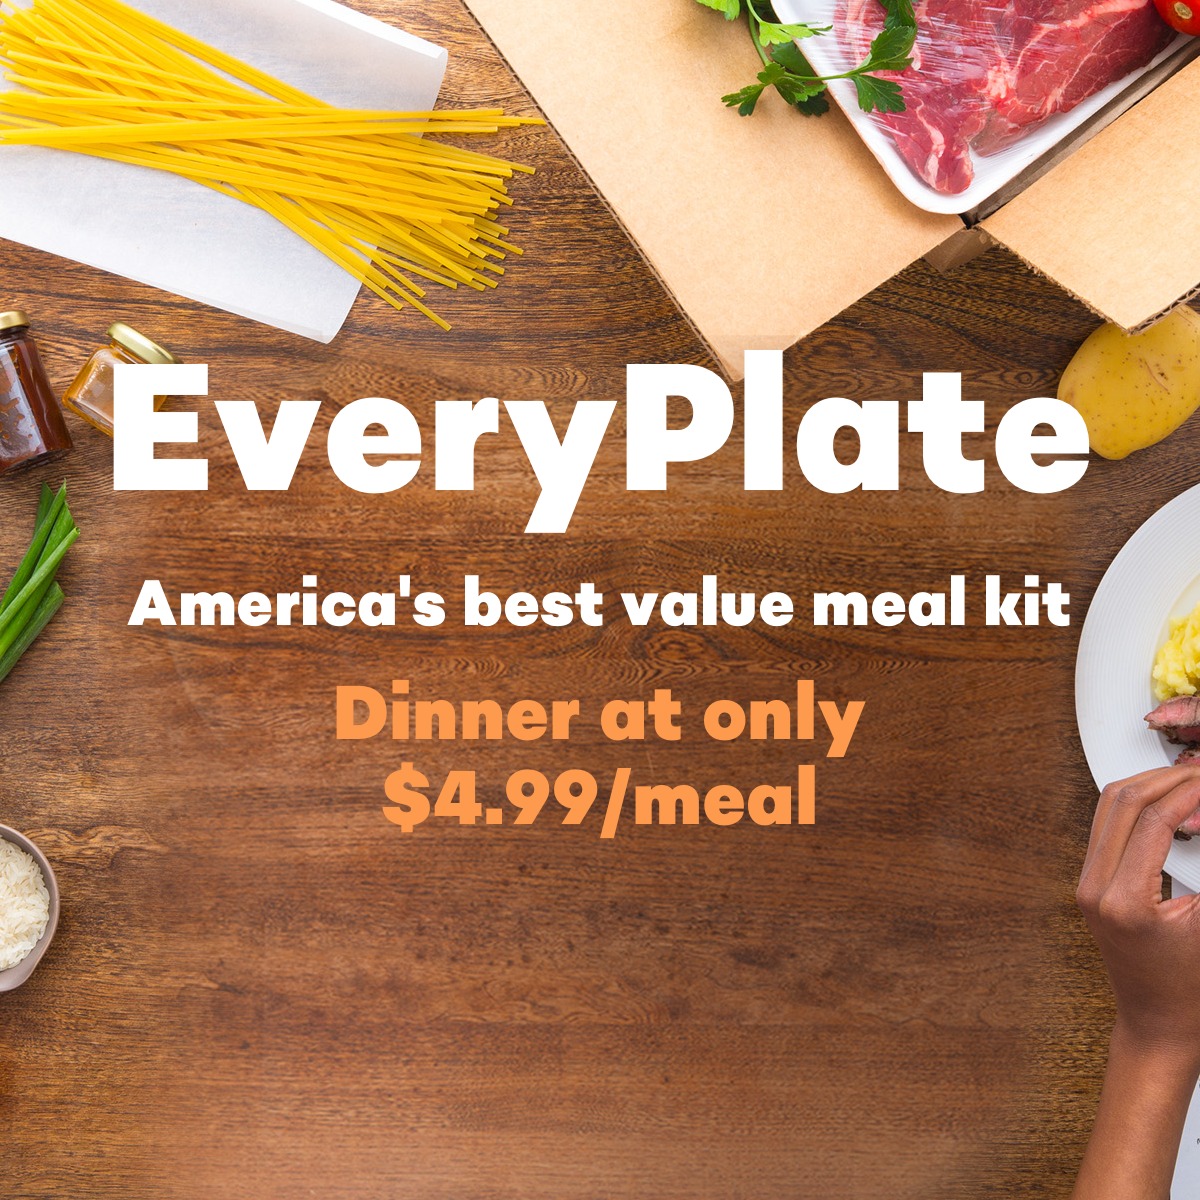 EveryPlate: The Affordable Meal Kit for Everyone | EveryPlate